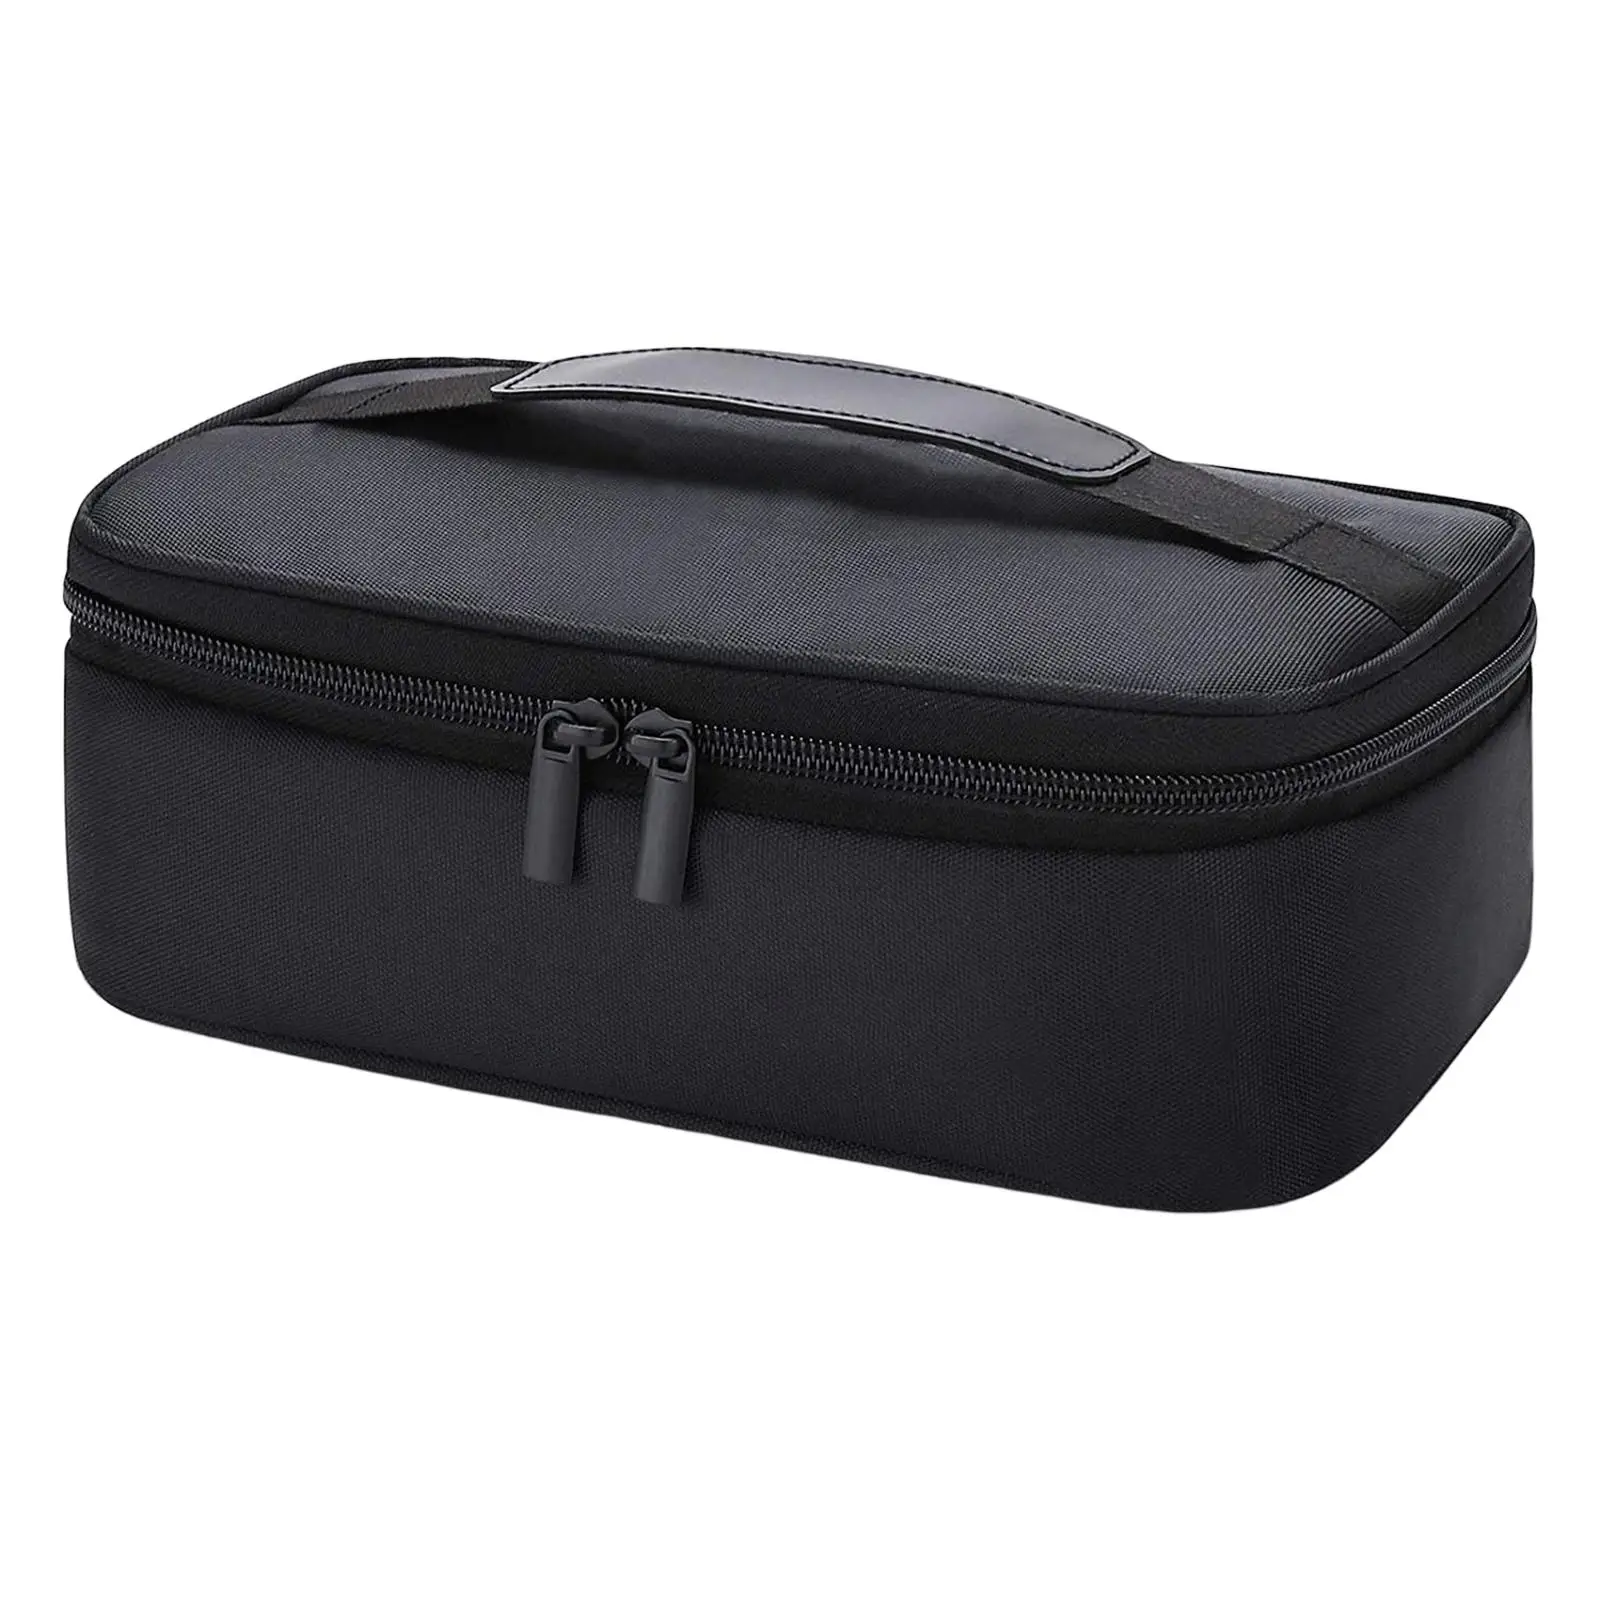 Portable Insulated Lunch Box Waterproof Lining Leakproof Reusable Lunch Cooler Tote for Office Picnic Outdoor Work Adults